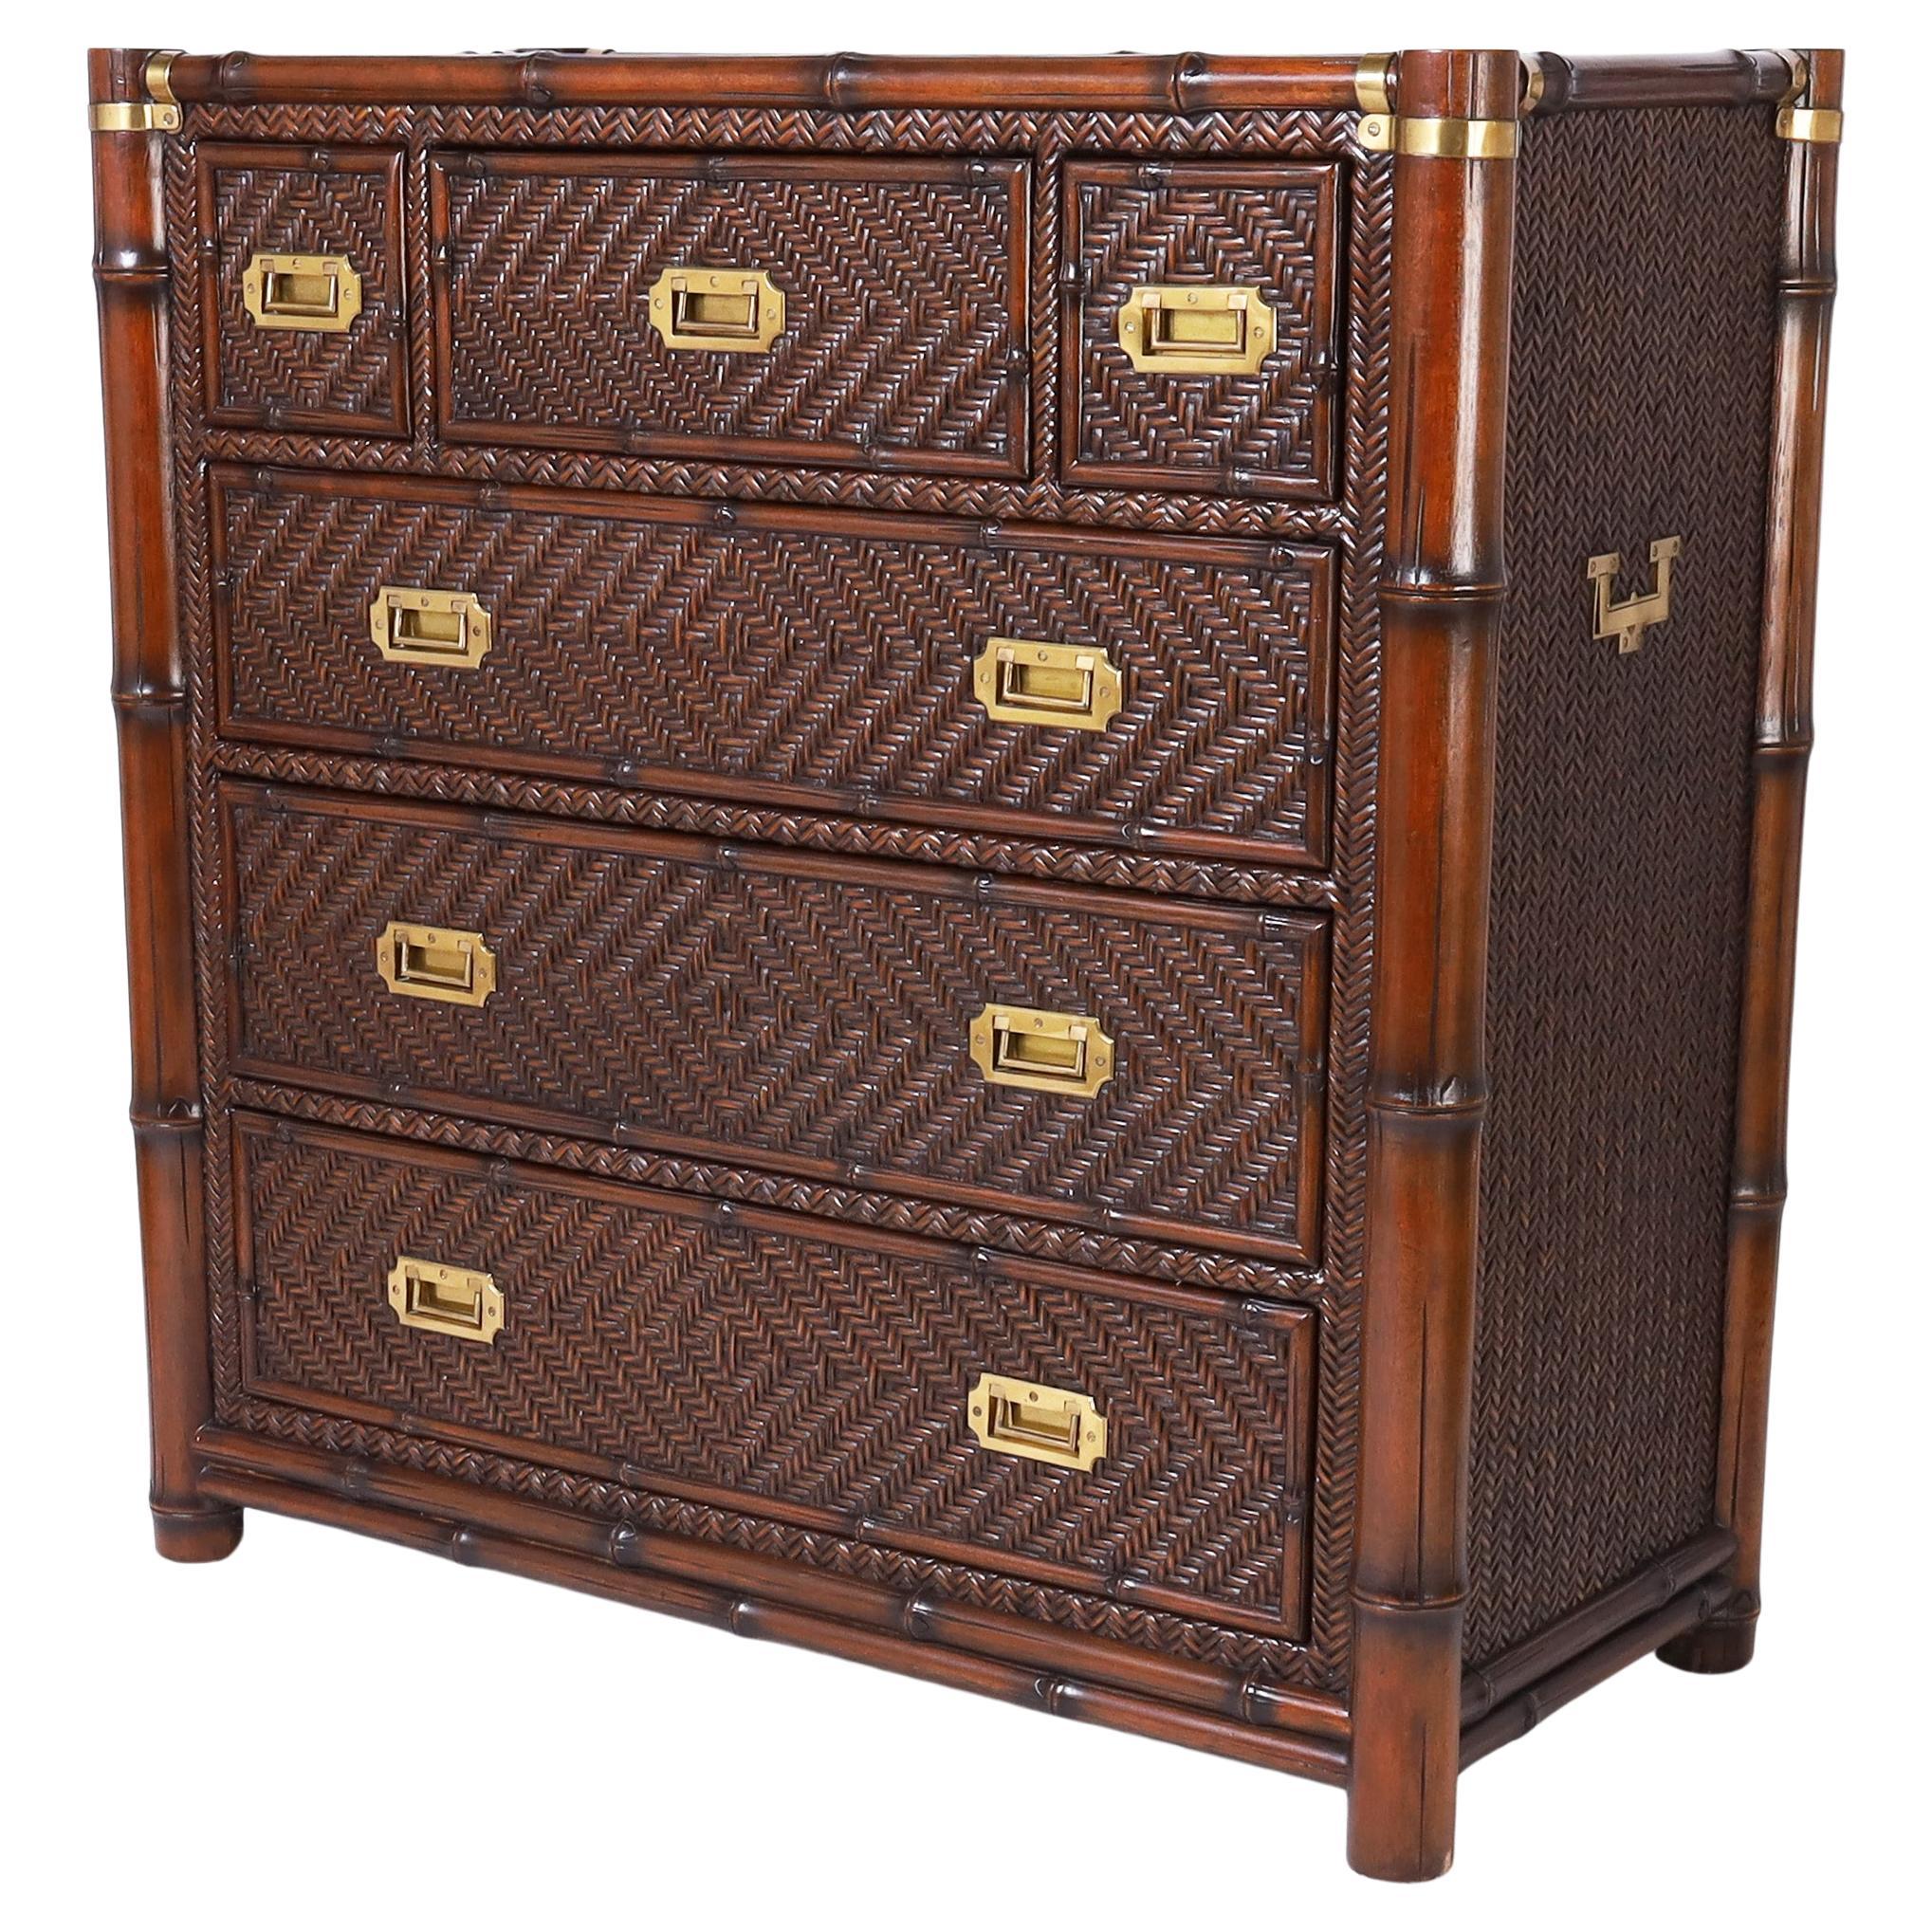 Ralph Lauren Faux Bamboo and Grasscloth Chest of Drawers